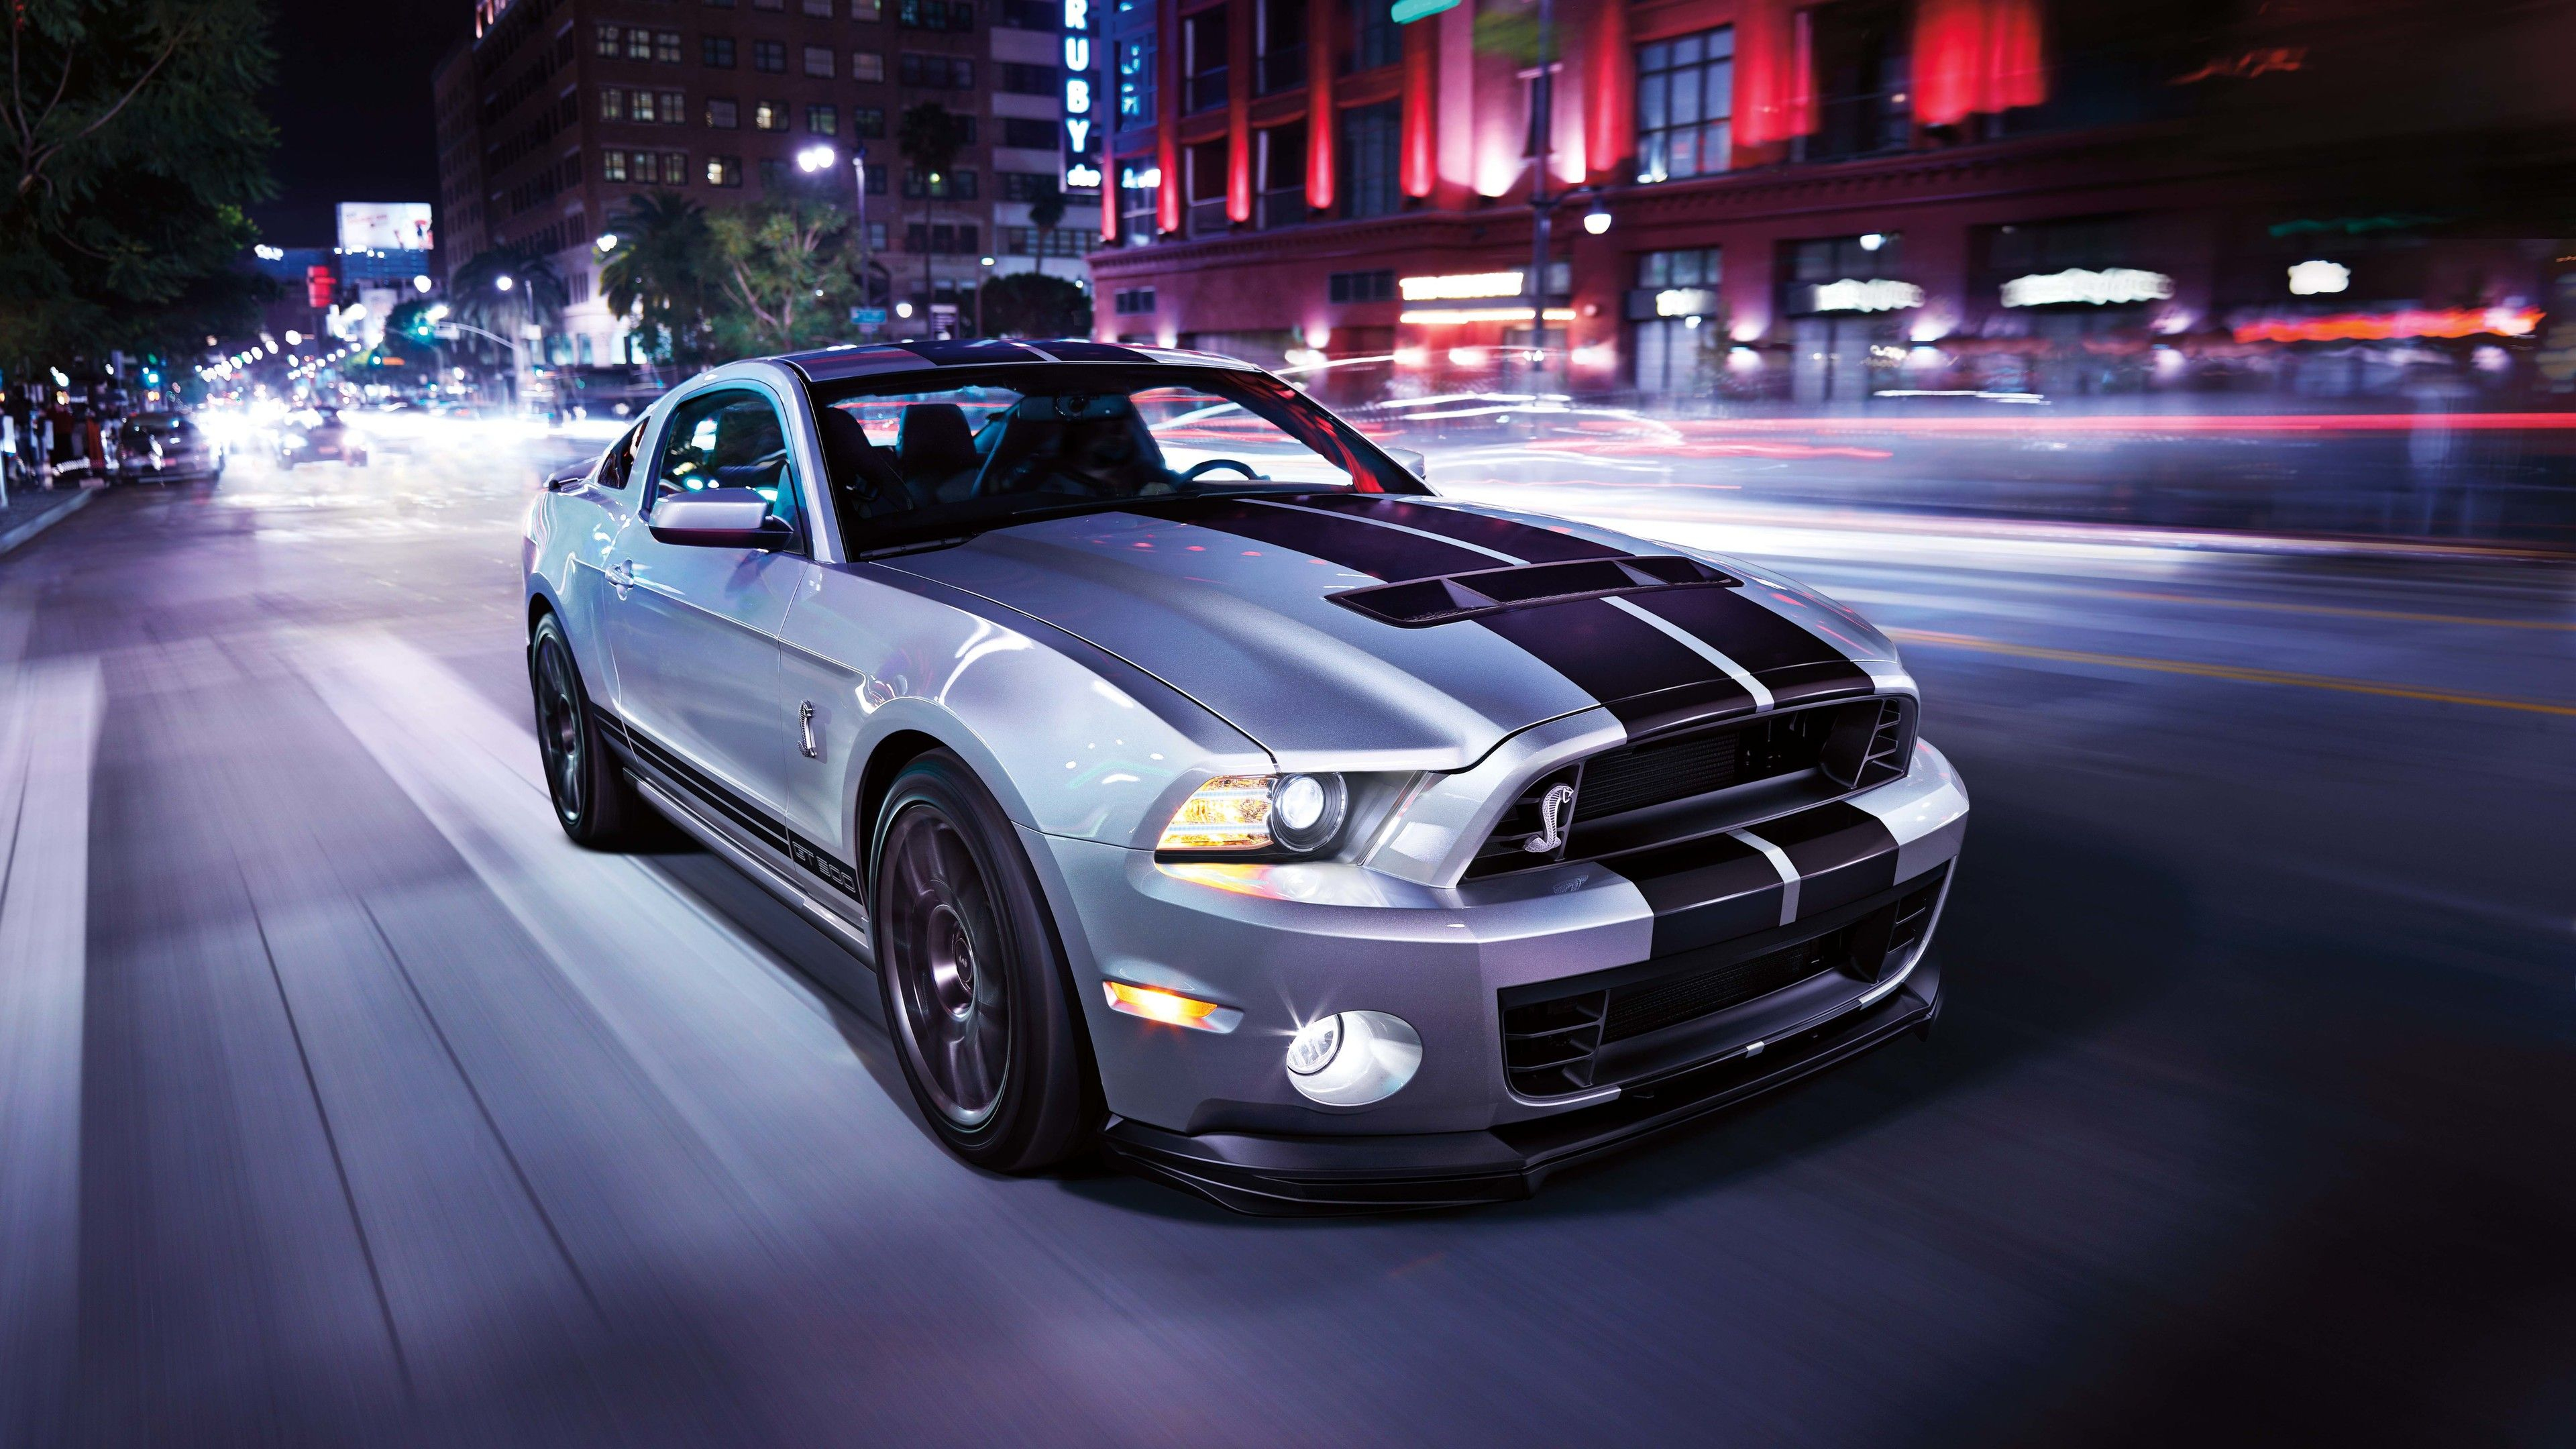 3840x2160 Ford Shelby 4k shelby wallpapers, hd-wallpapers, cars wallpapers, 8k wallpapers, 5k wallpapers, 4k&acirc;&#128;&brvbar; | Ford mustang shelby gt500, Ford mustang gt, Ford mustang gt500